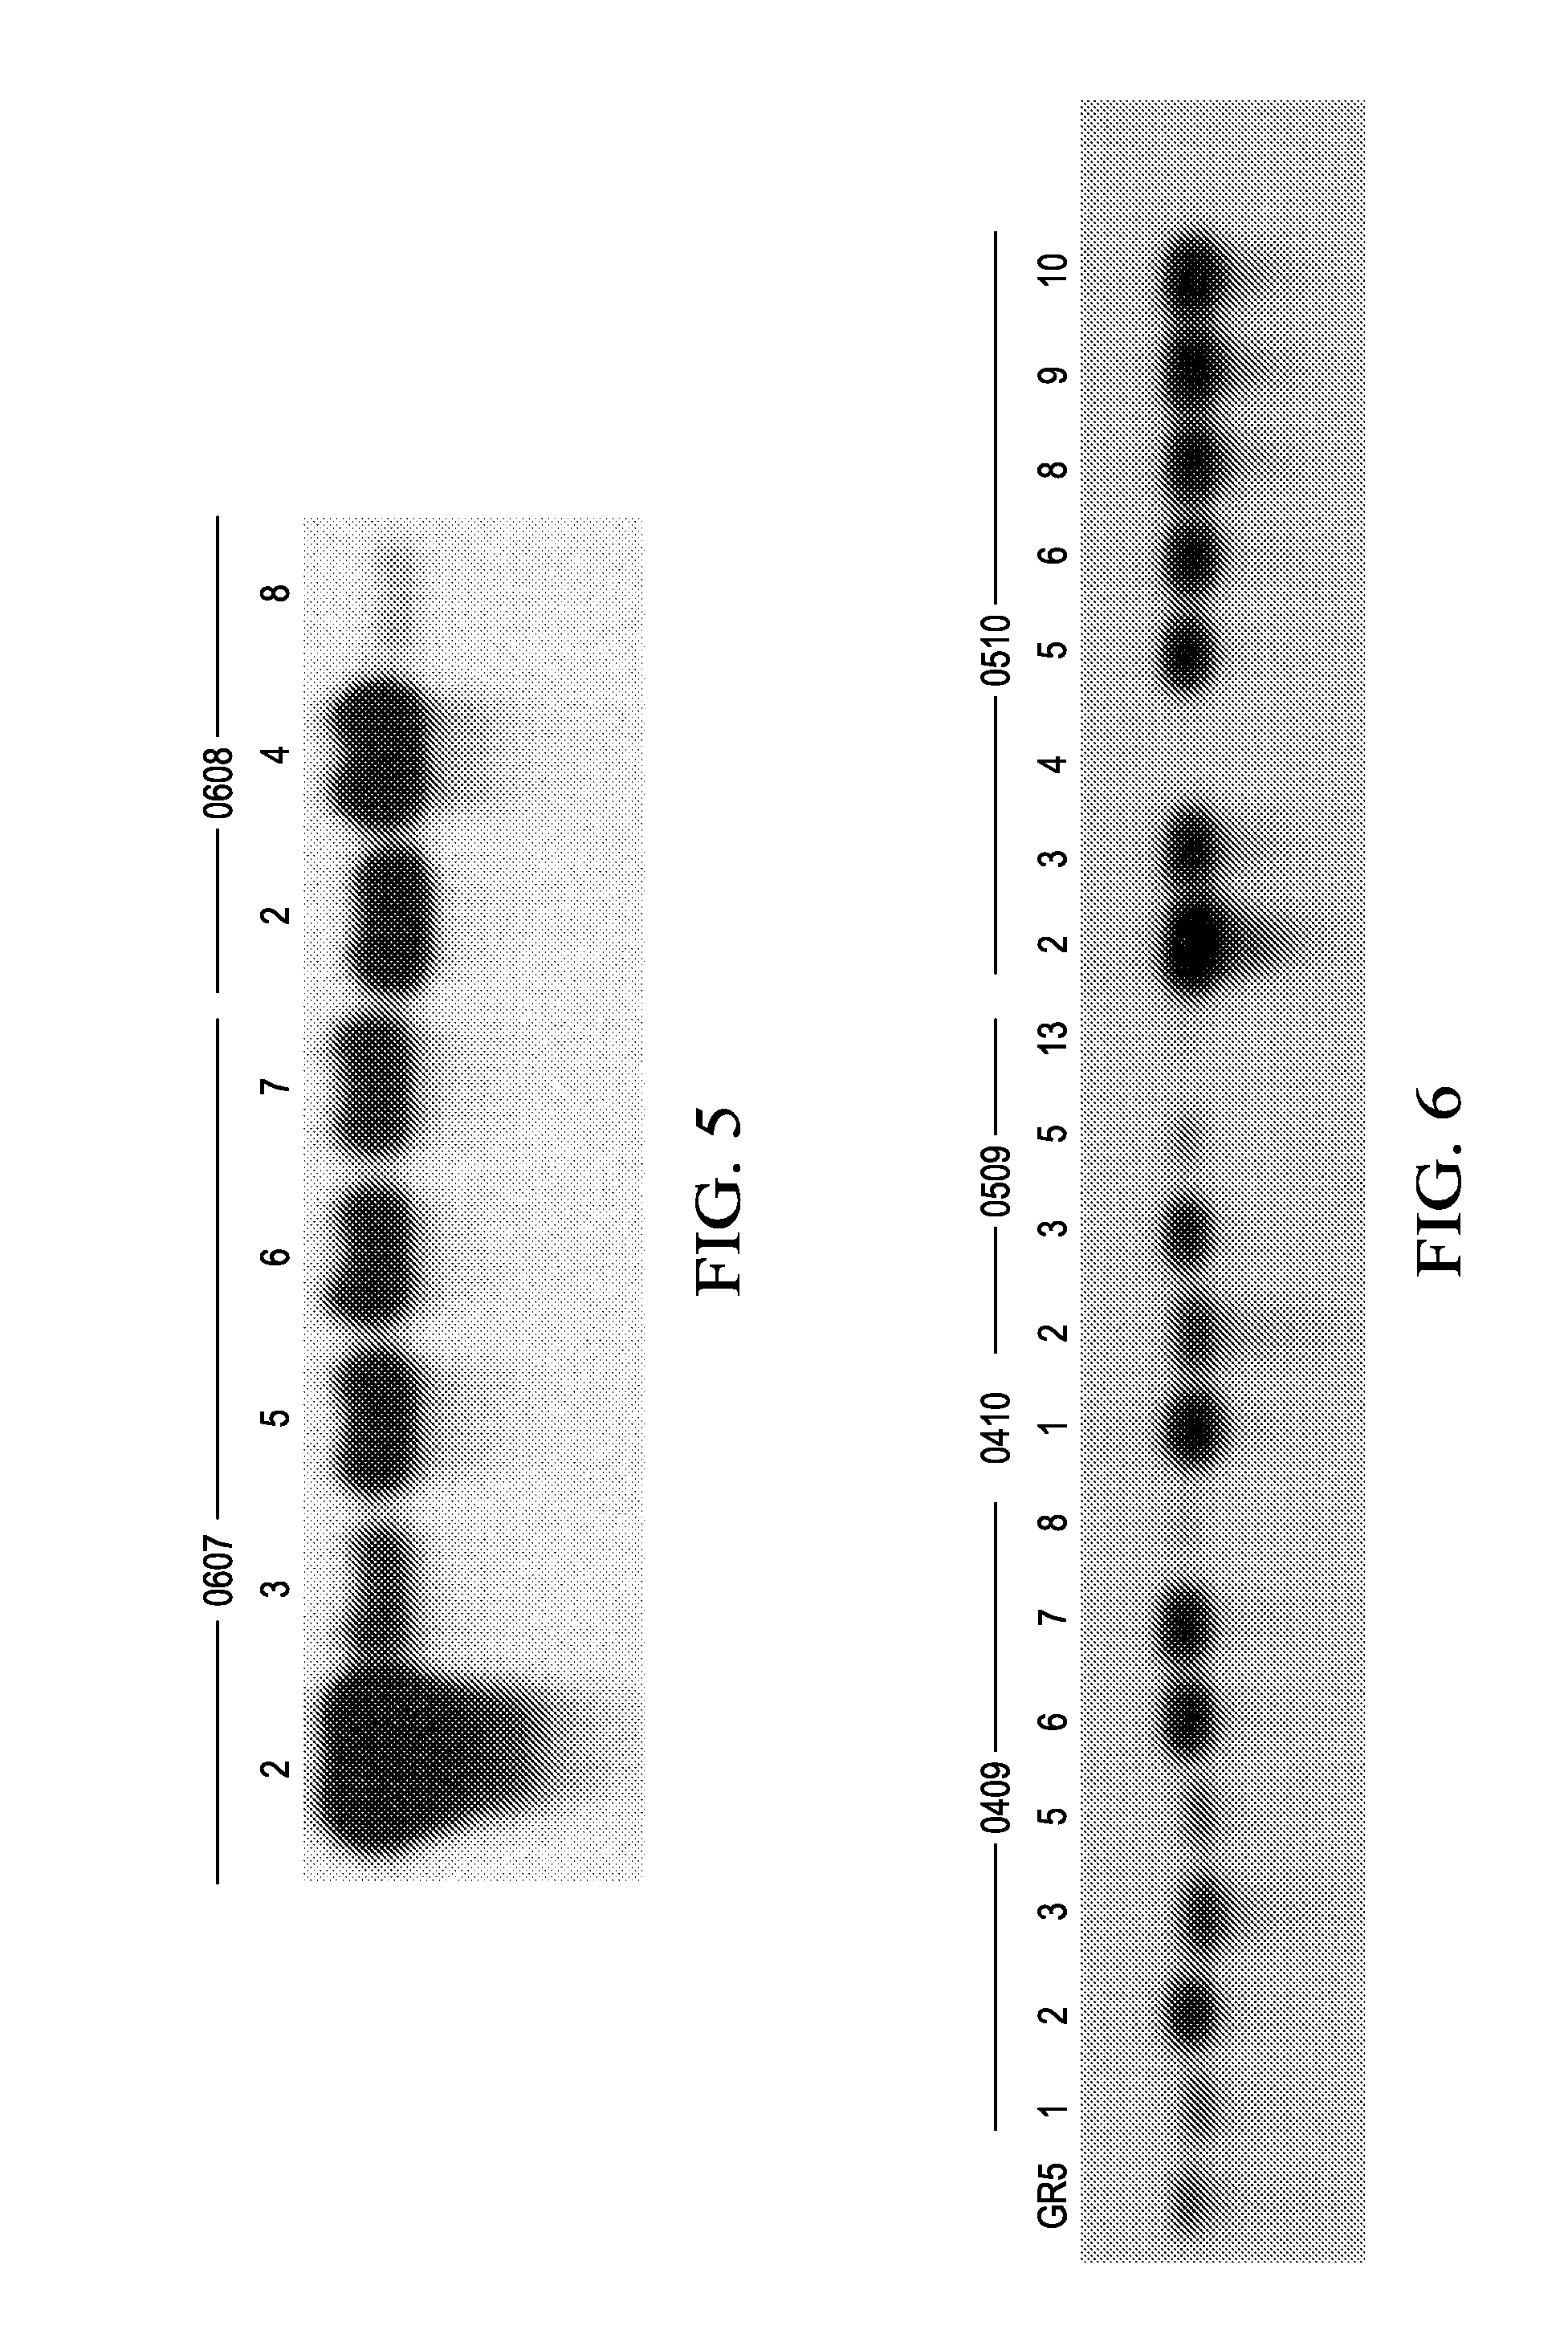 Pathogen resistant citrus compositions, organisms, systems, and methods